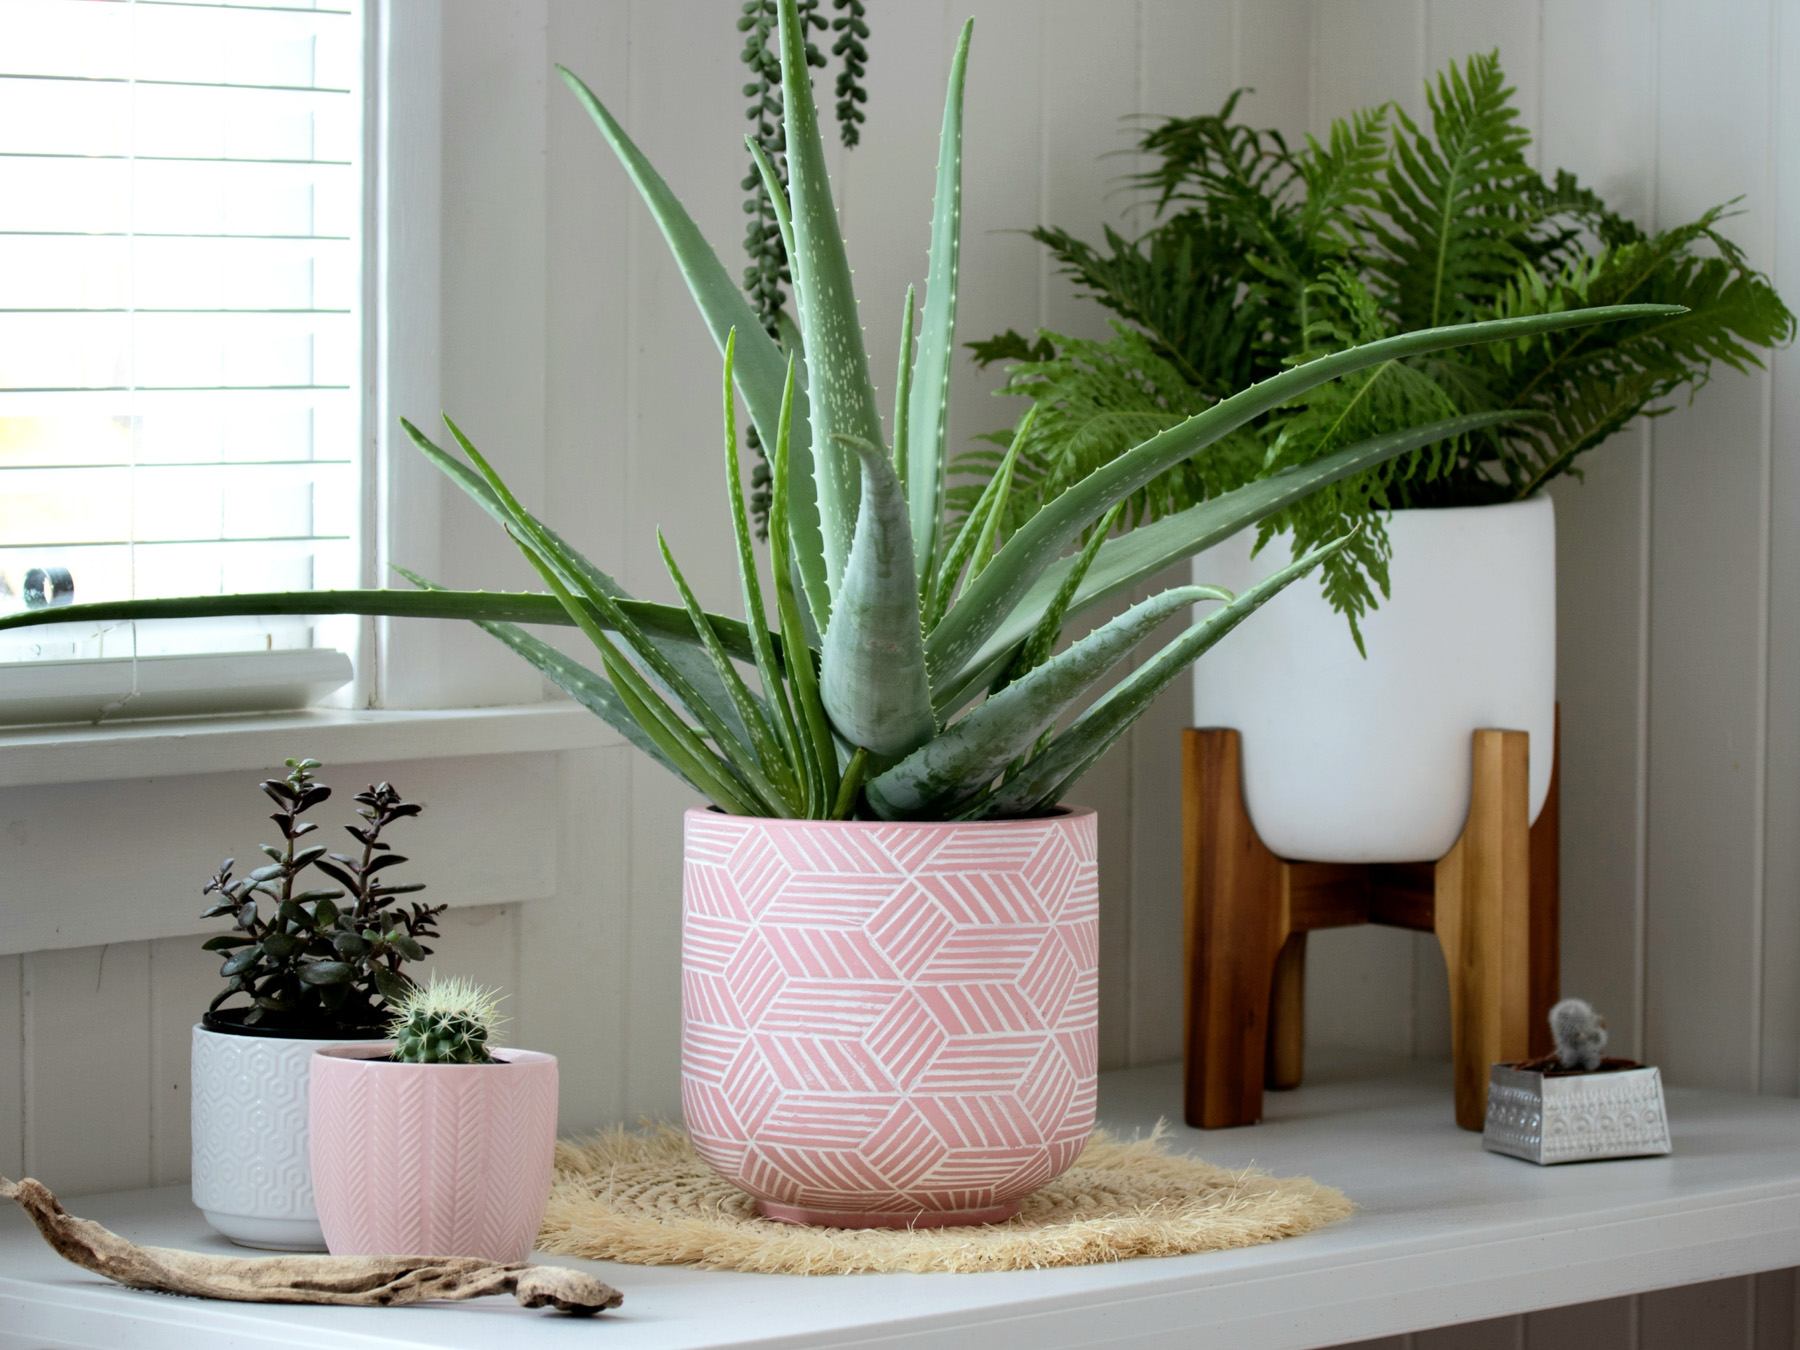 When choosing indoor plants, availability of light is key.